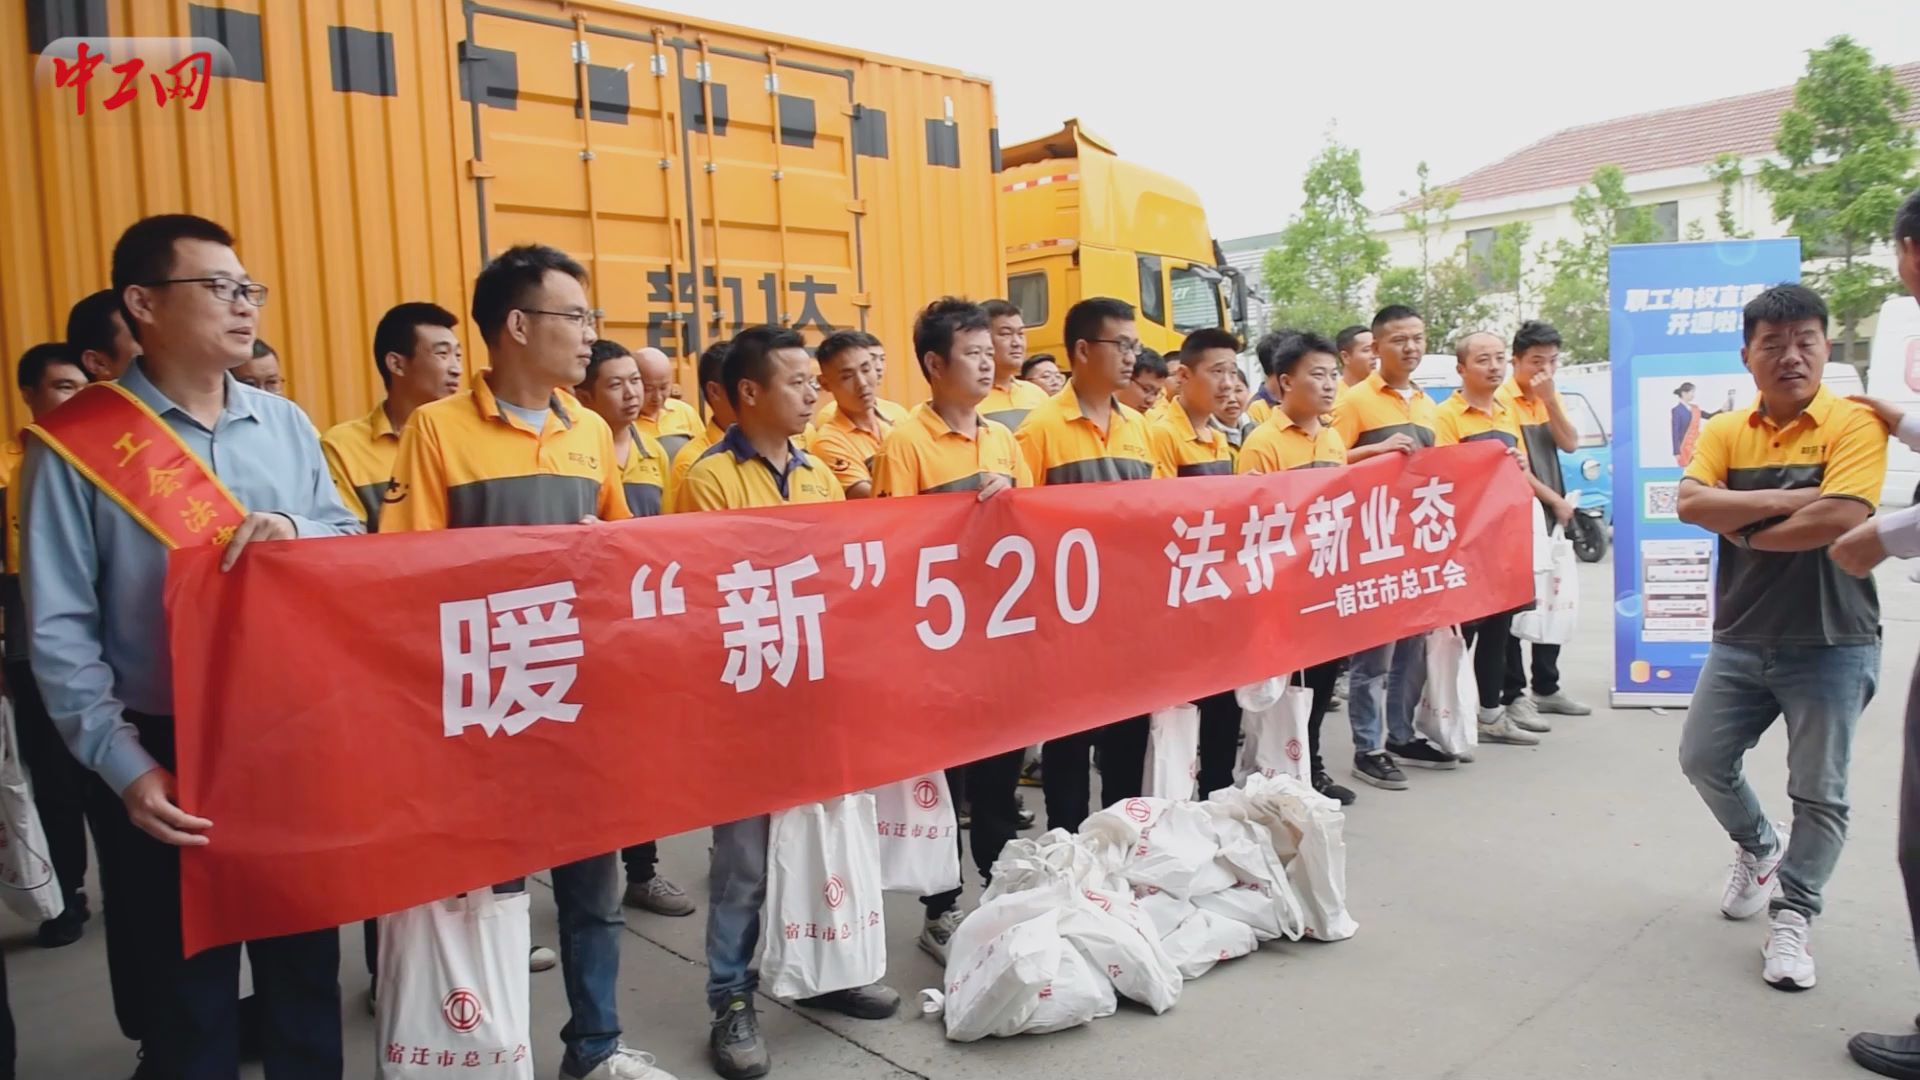  Suqian Federation of Trade Unions held the publicity activity of "warm 'new' 520 · new business form of legal protection"